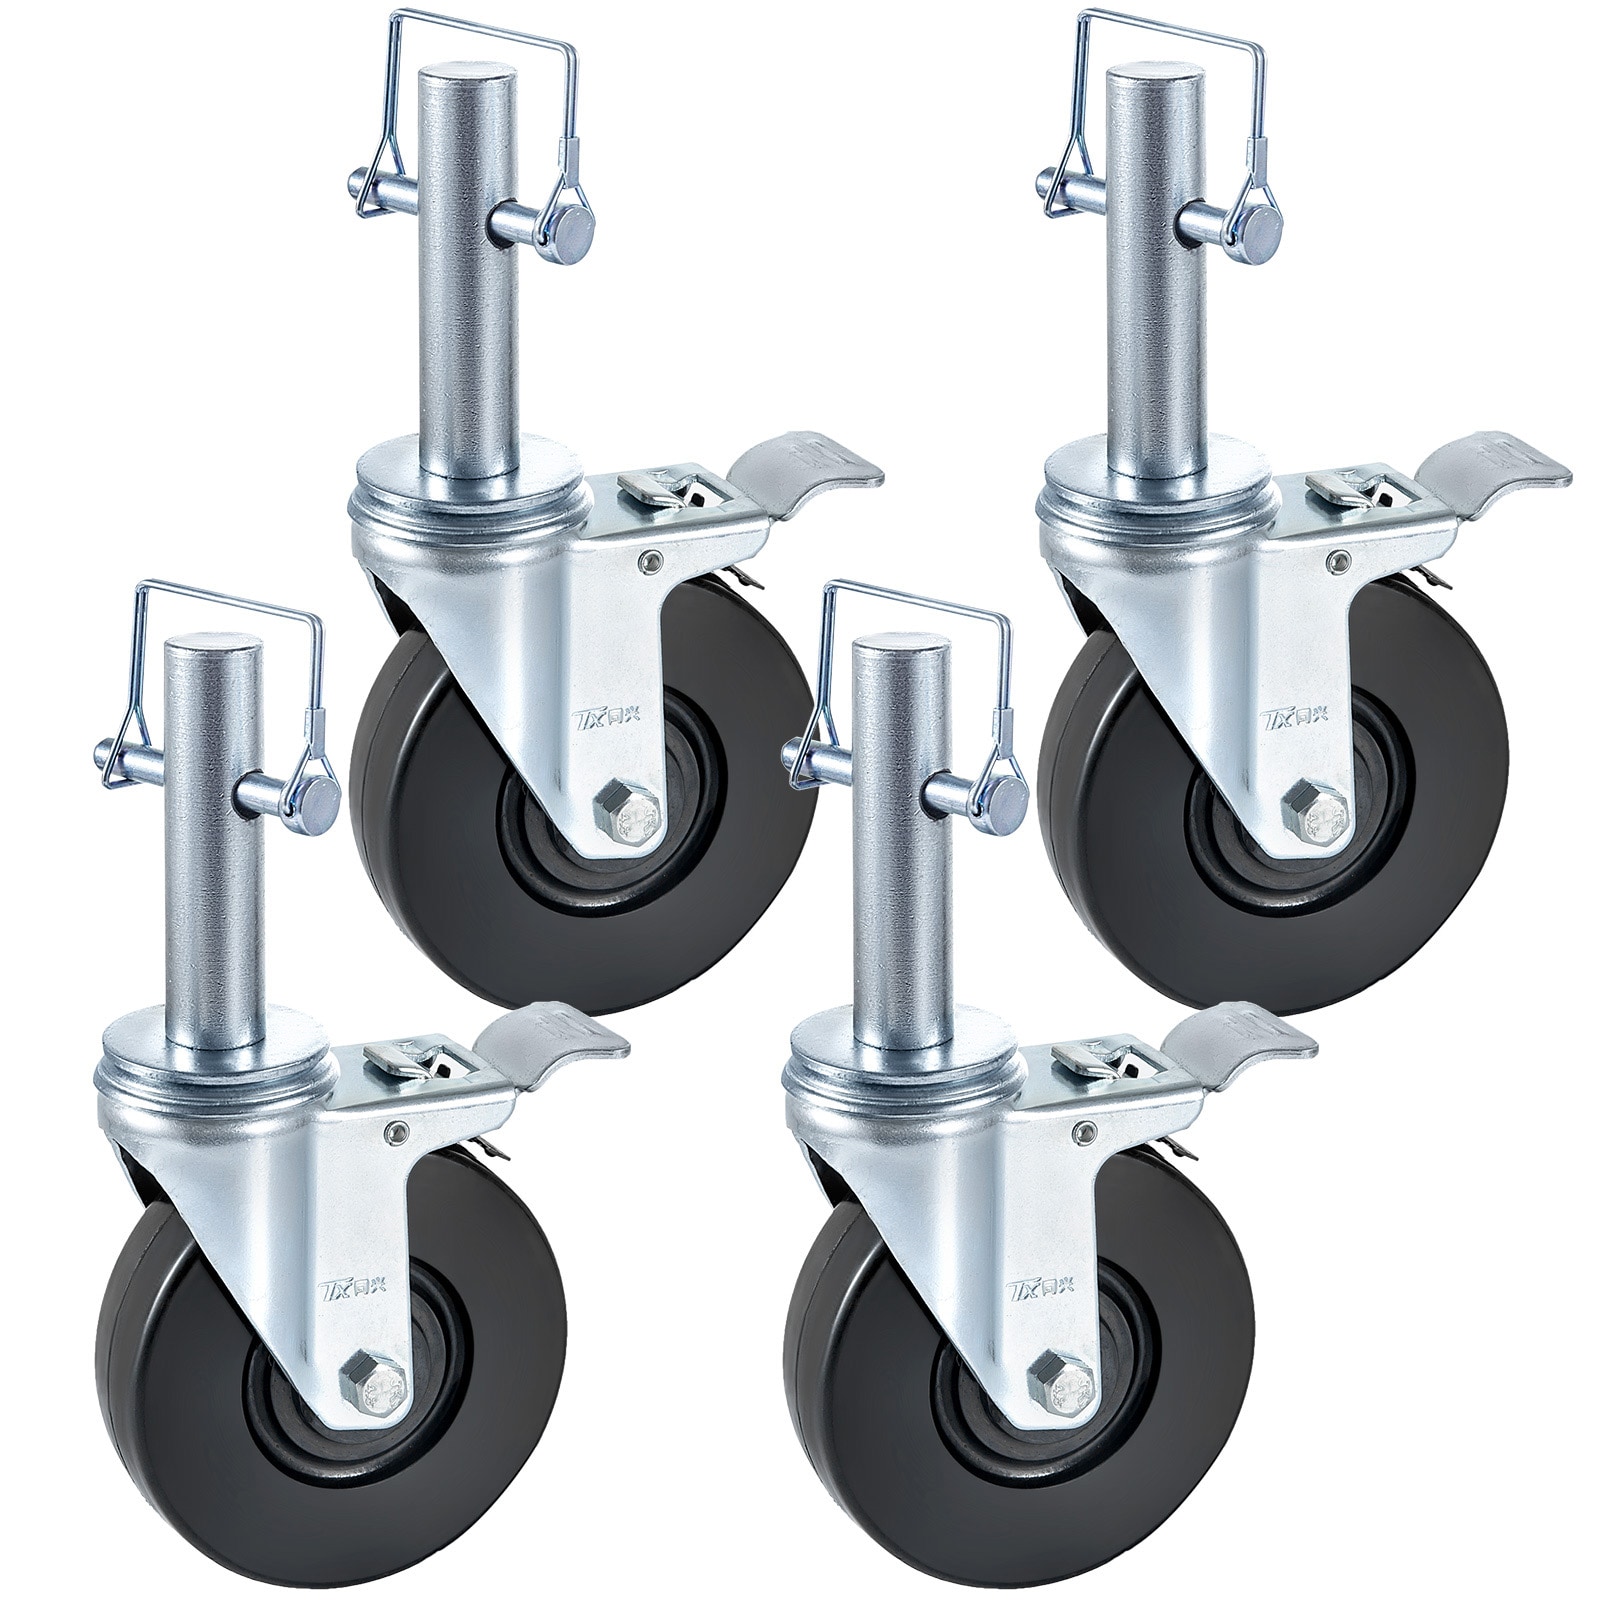 Small Appliance Wheels 4Pcs Appliance Rollers For Kitchen